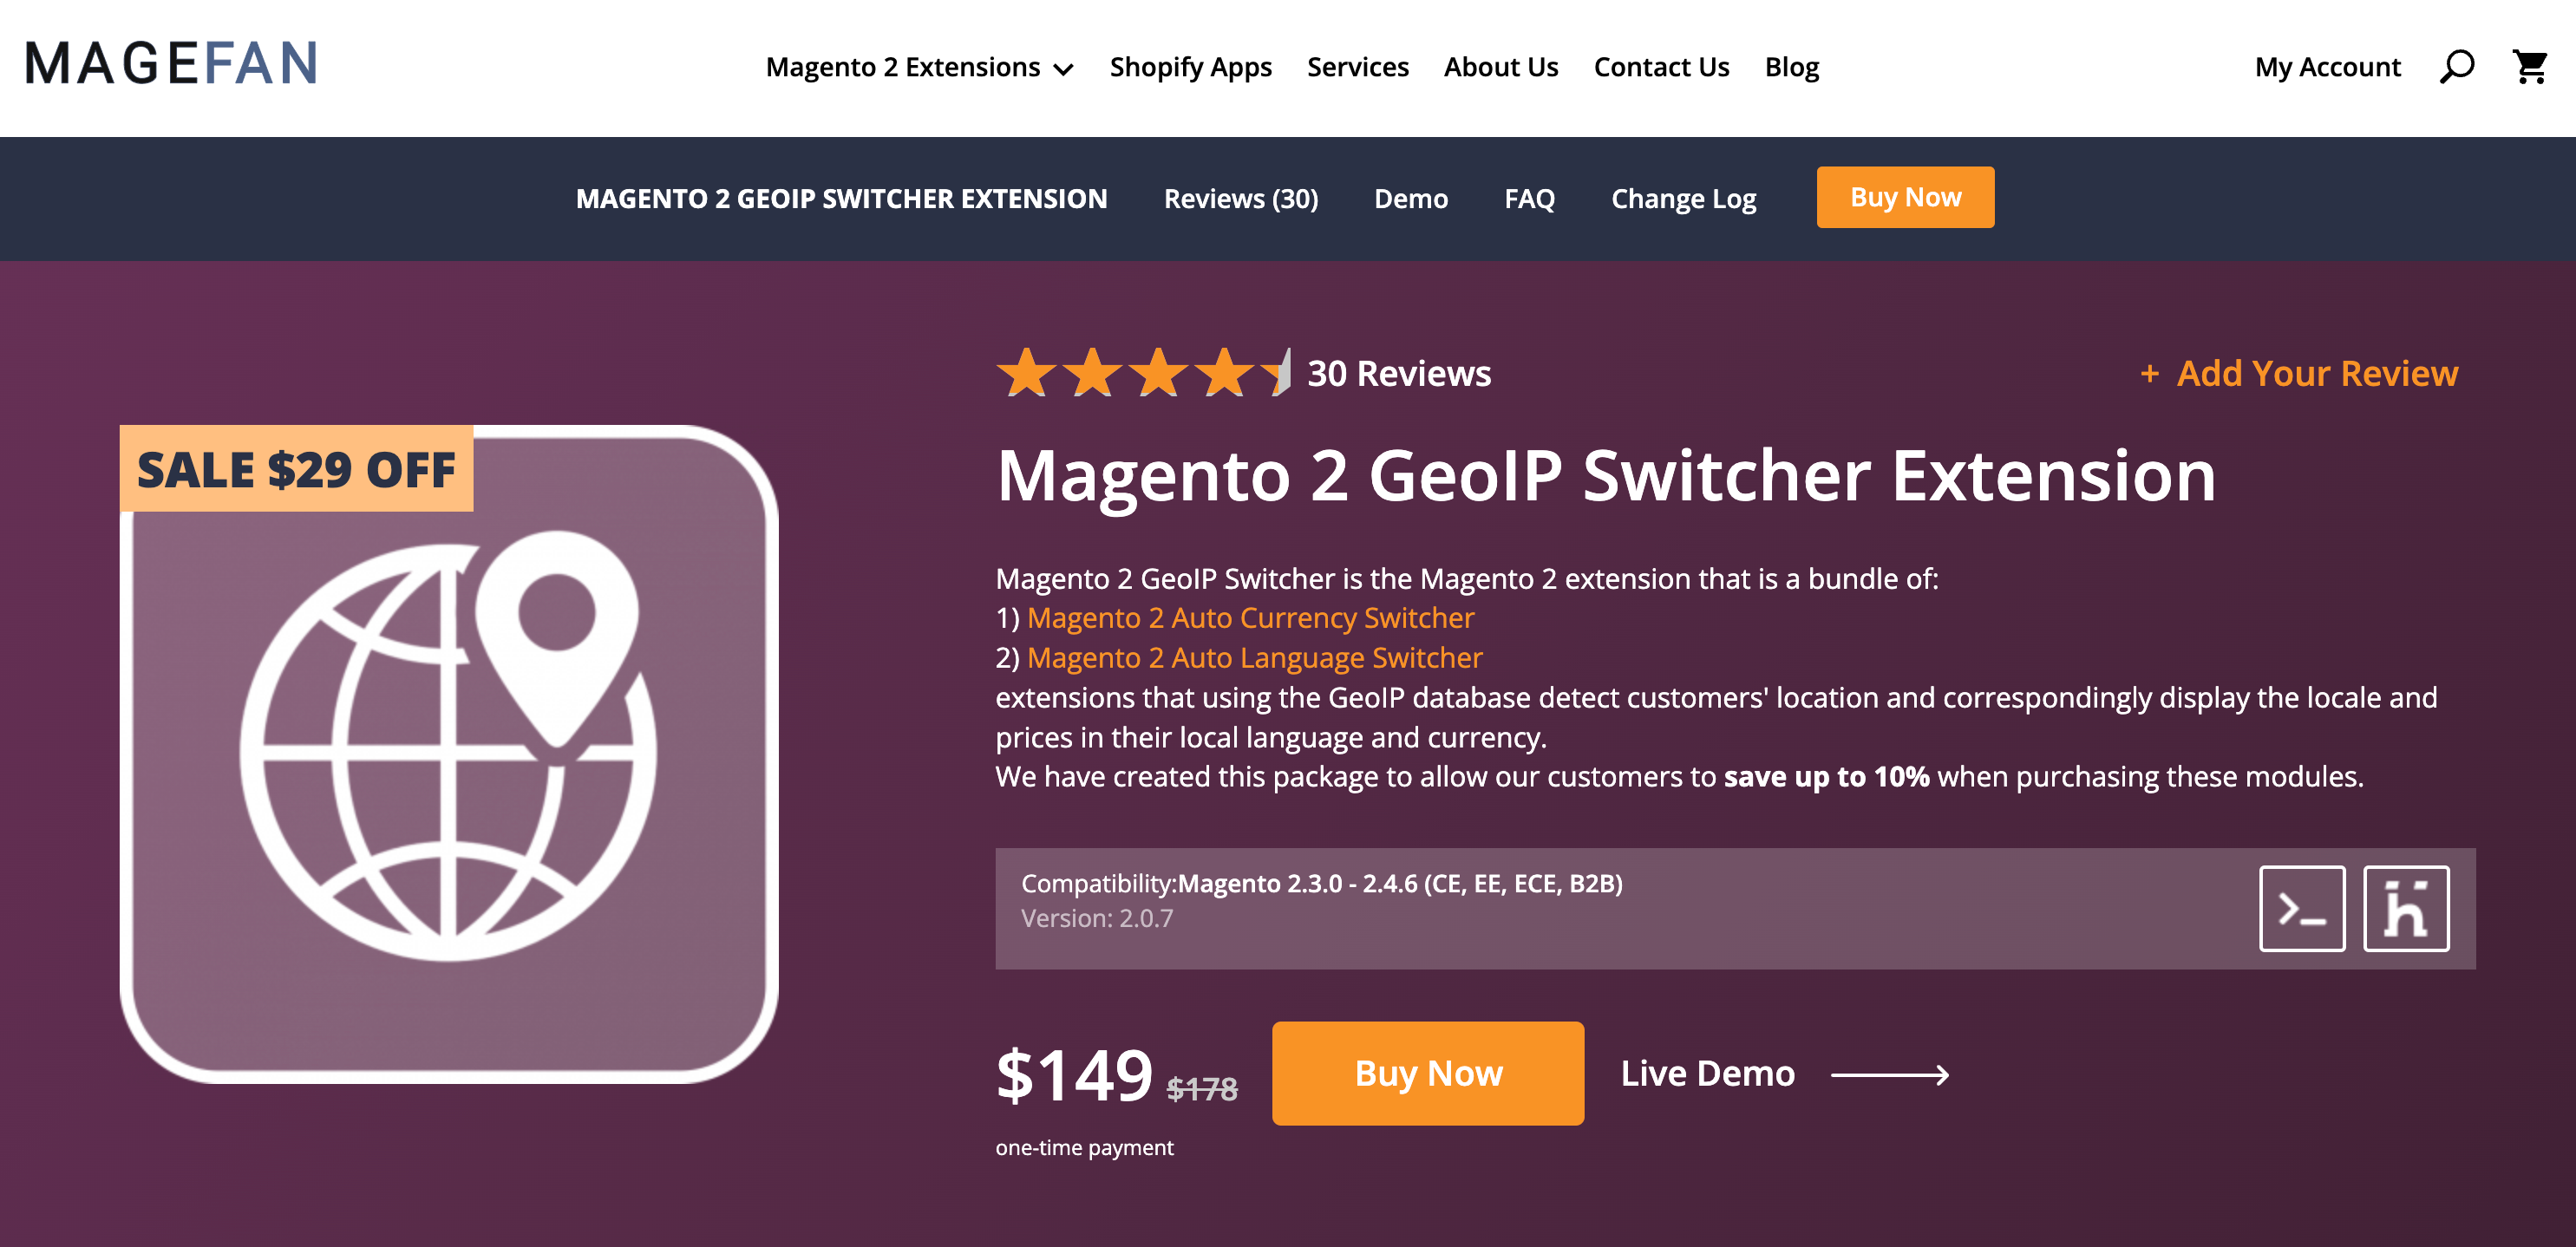 Magefan's Magento 2 GeoIP Switcher extension